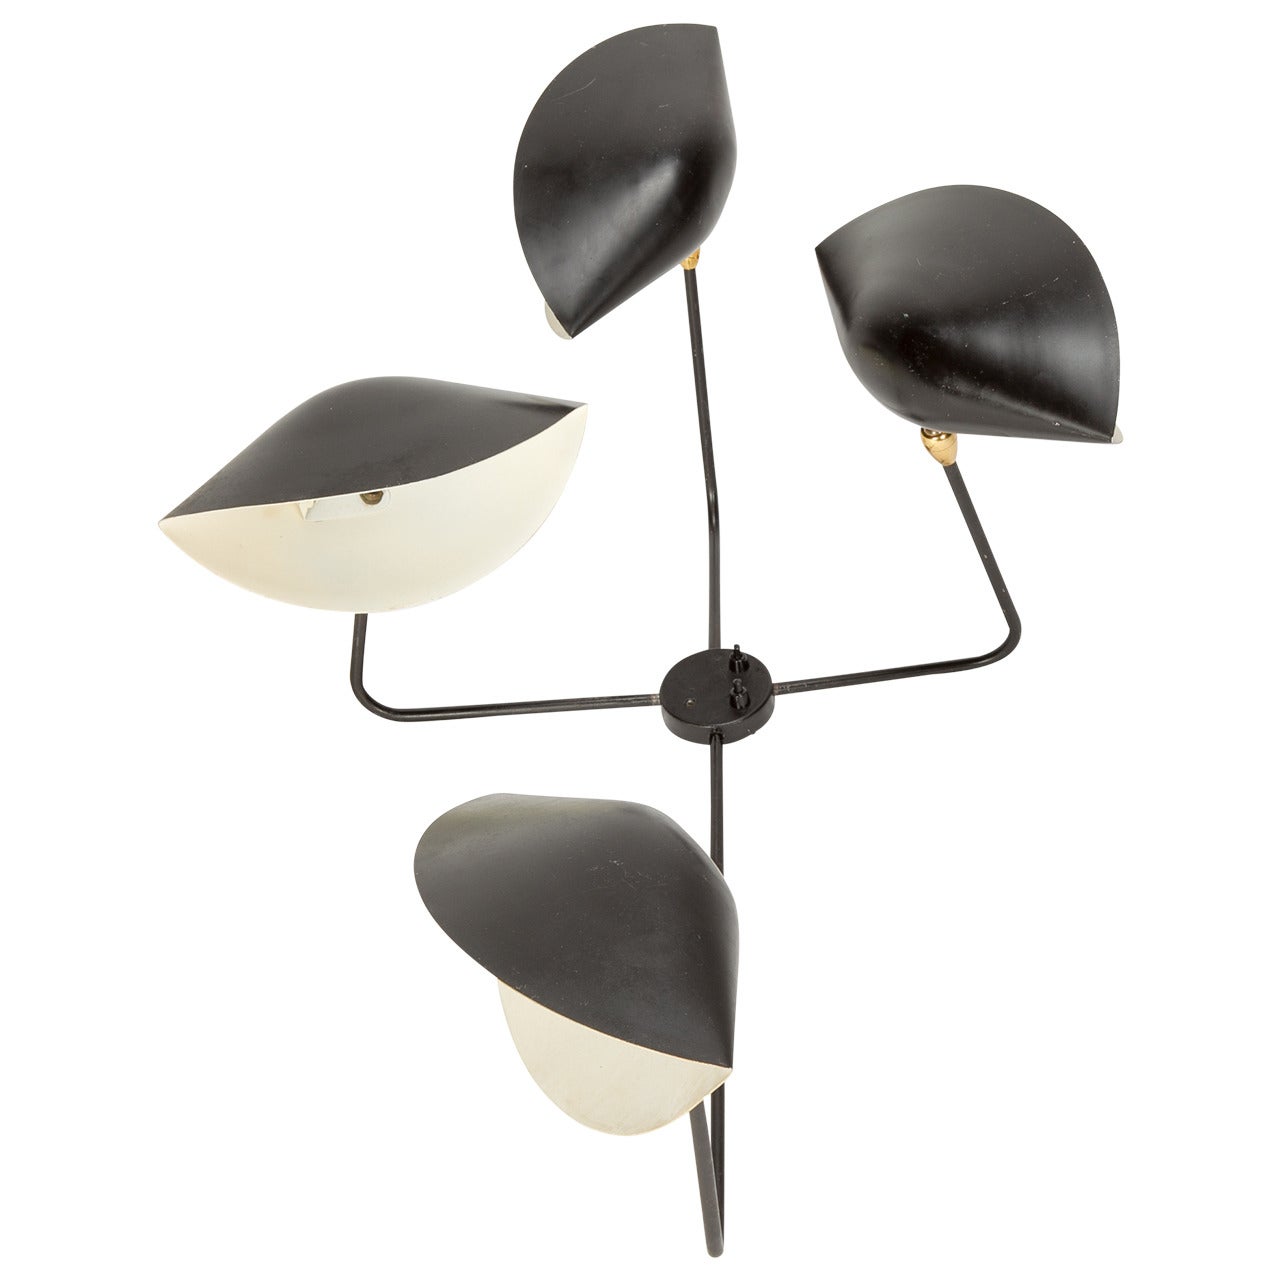 Serge Mouille Four-Arm Wall Lamp from the 1950s